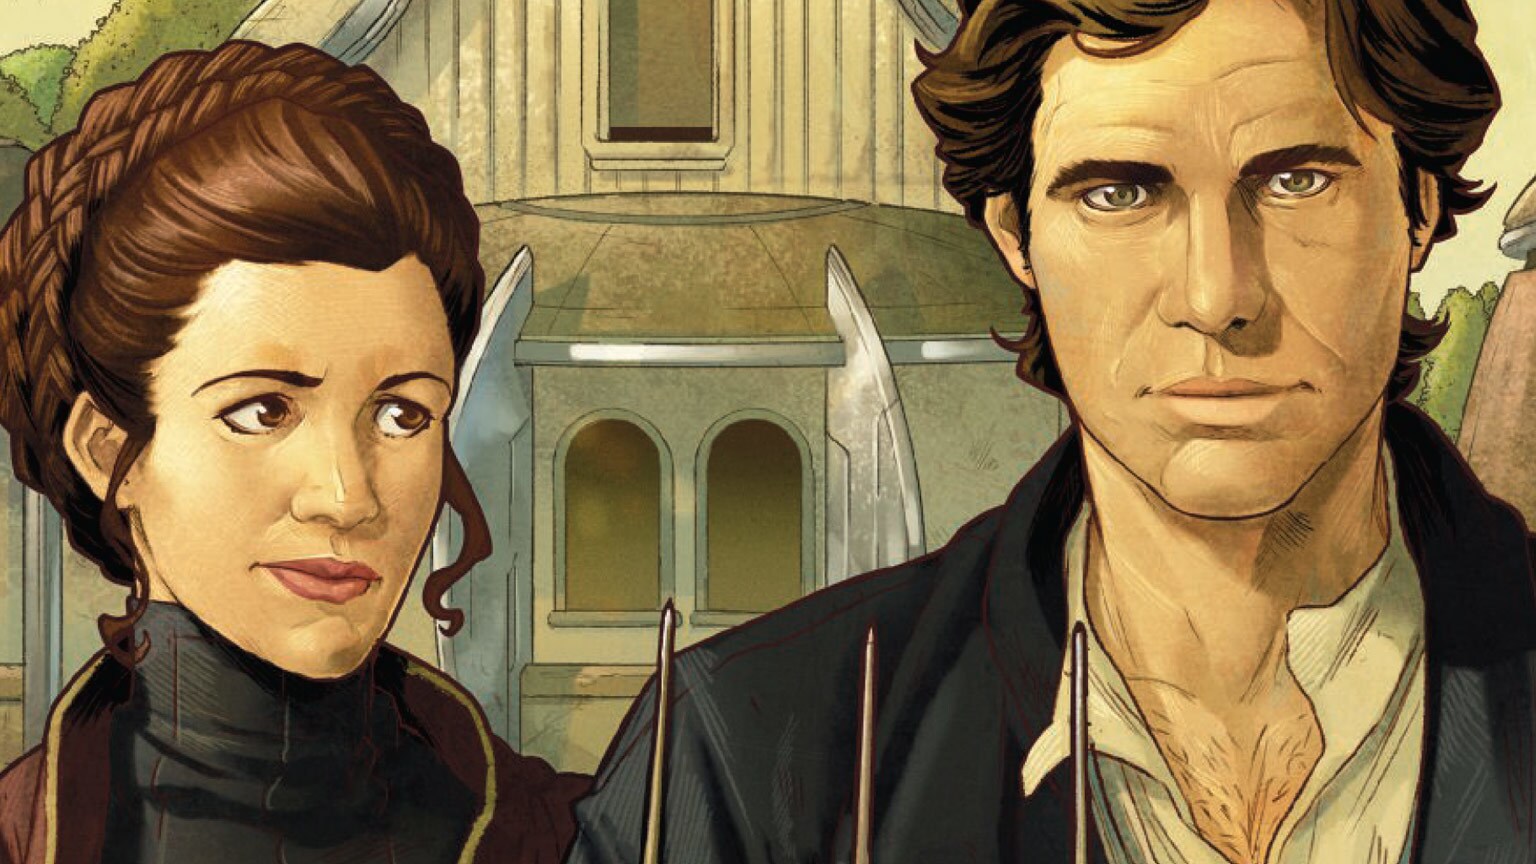 The Galaxy in Comics: Star Wars #57 Brings Humor and Mystery